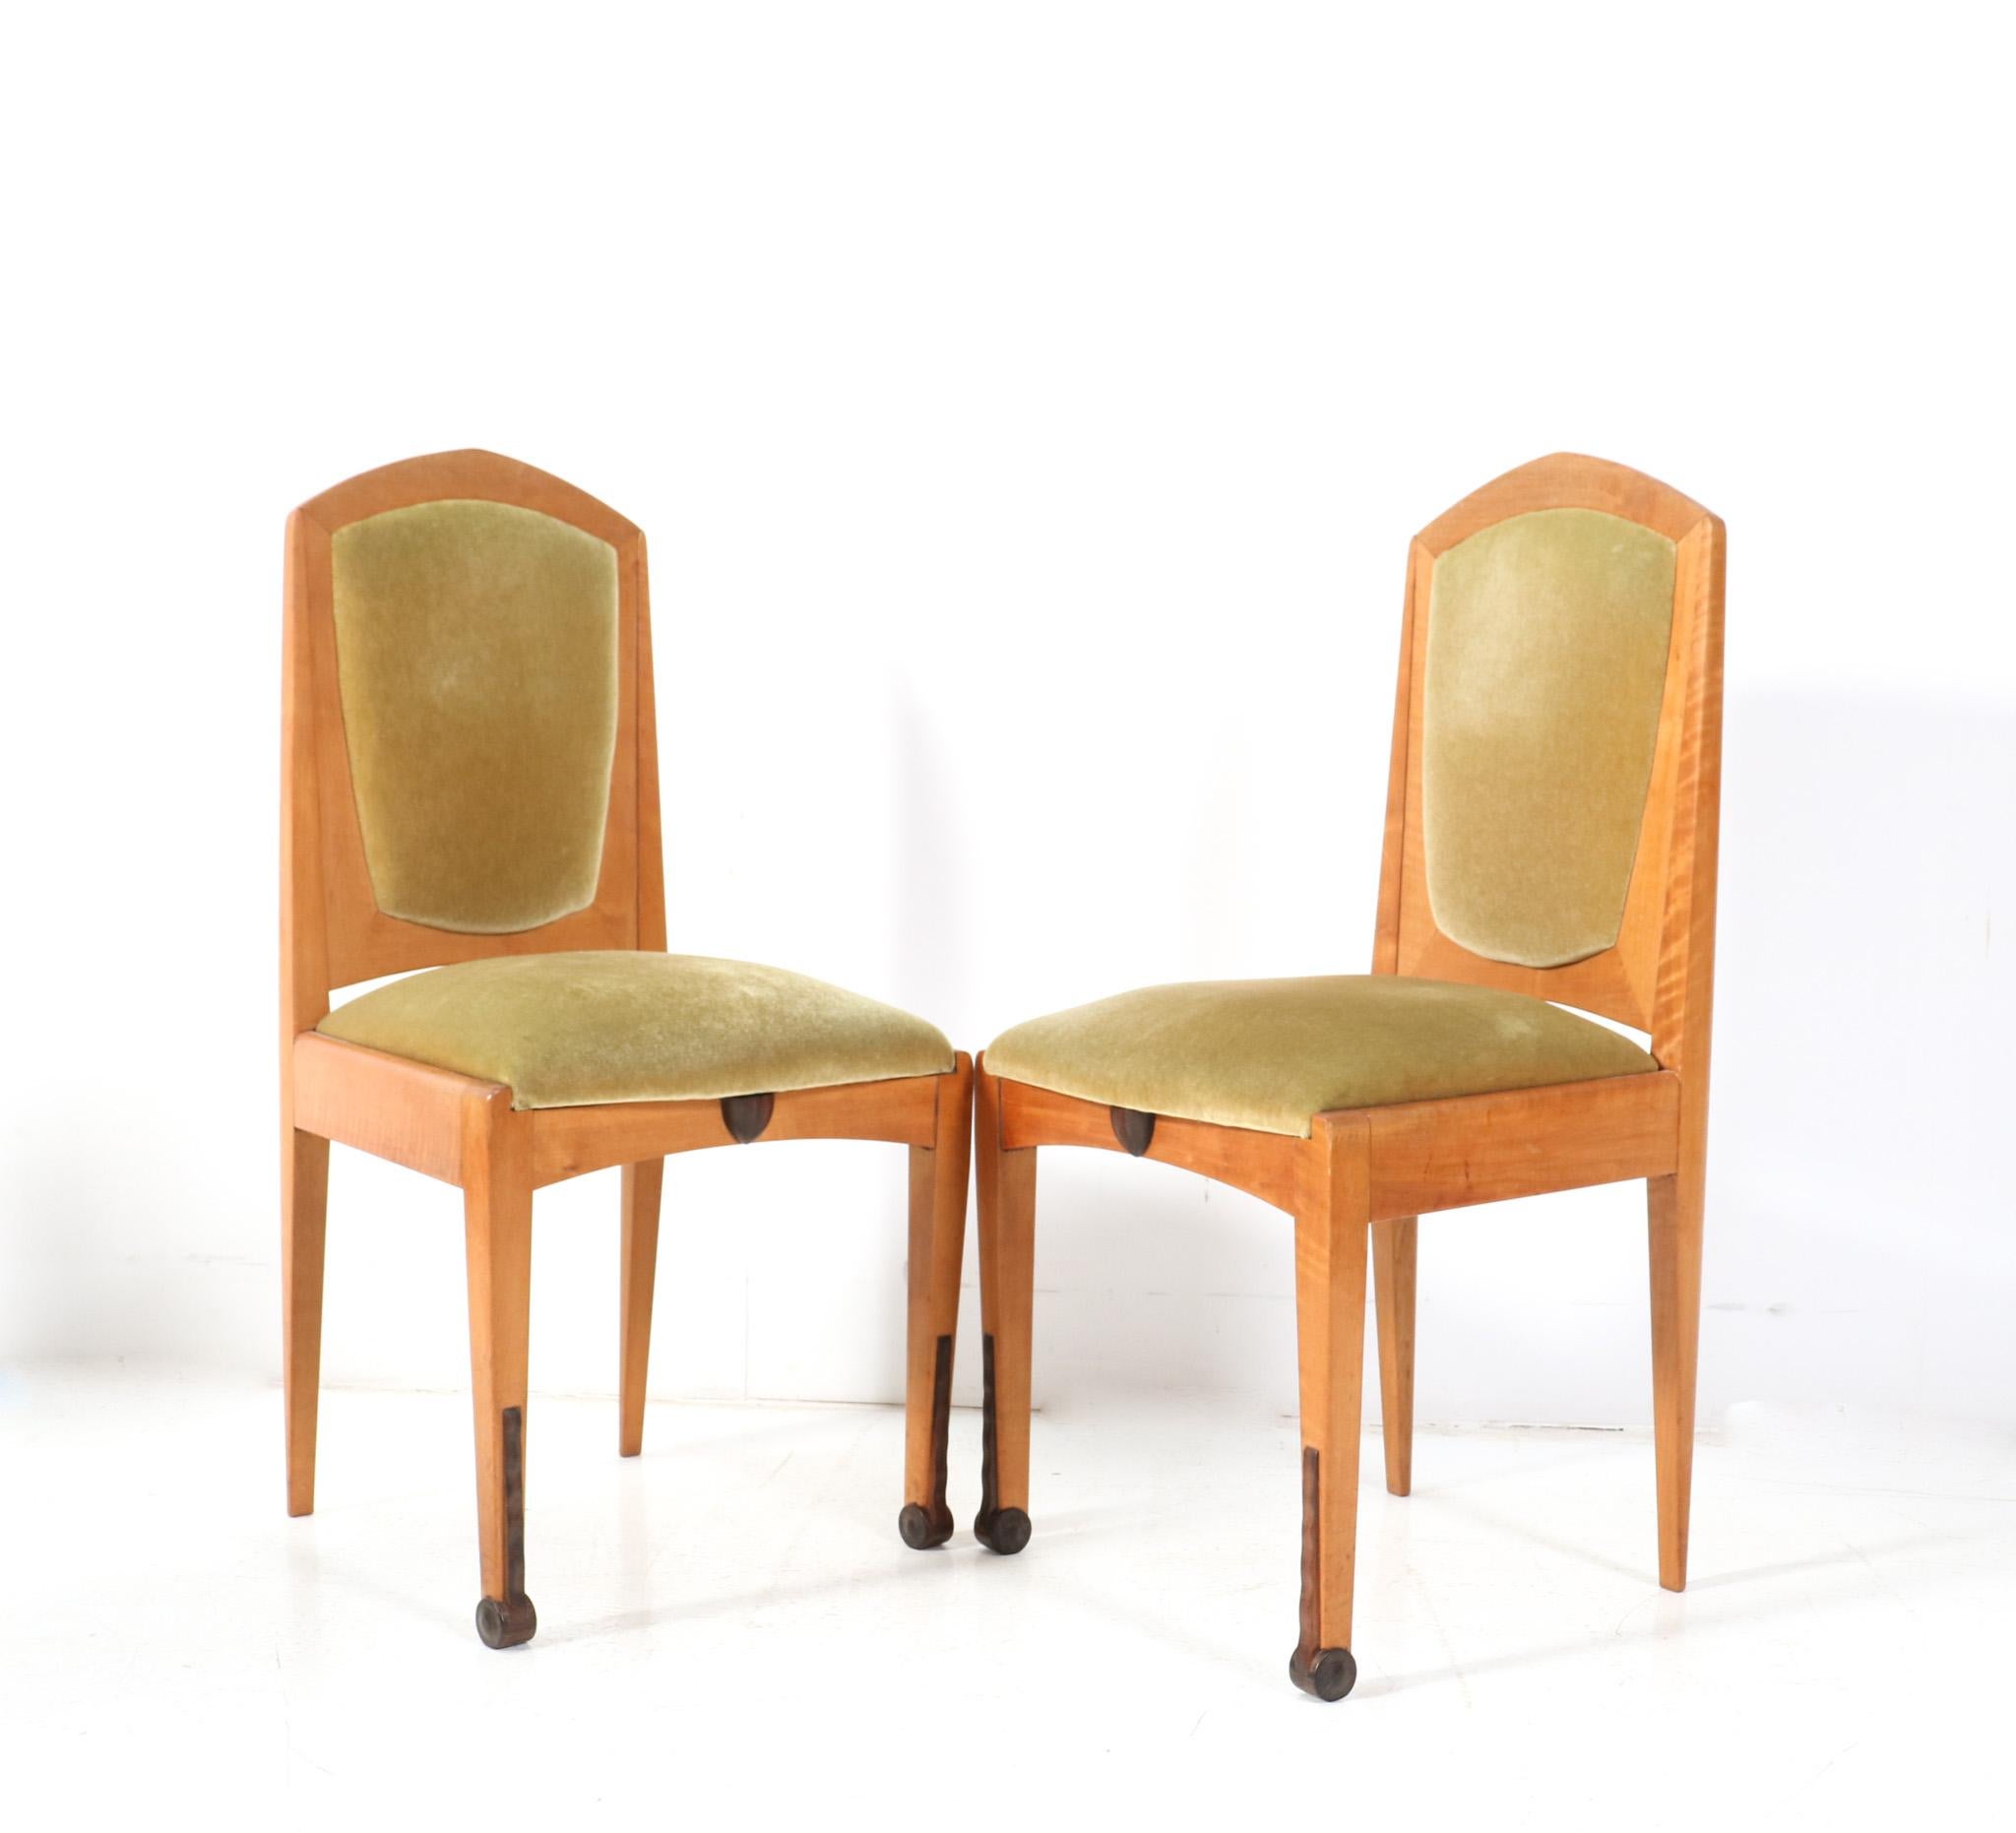 Set of Six Art Deco Amsterdamse School Dining Room Chairs by J.J. Zijfers, 1920s For Sale 7